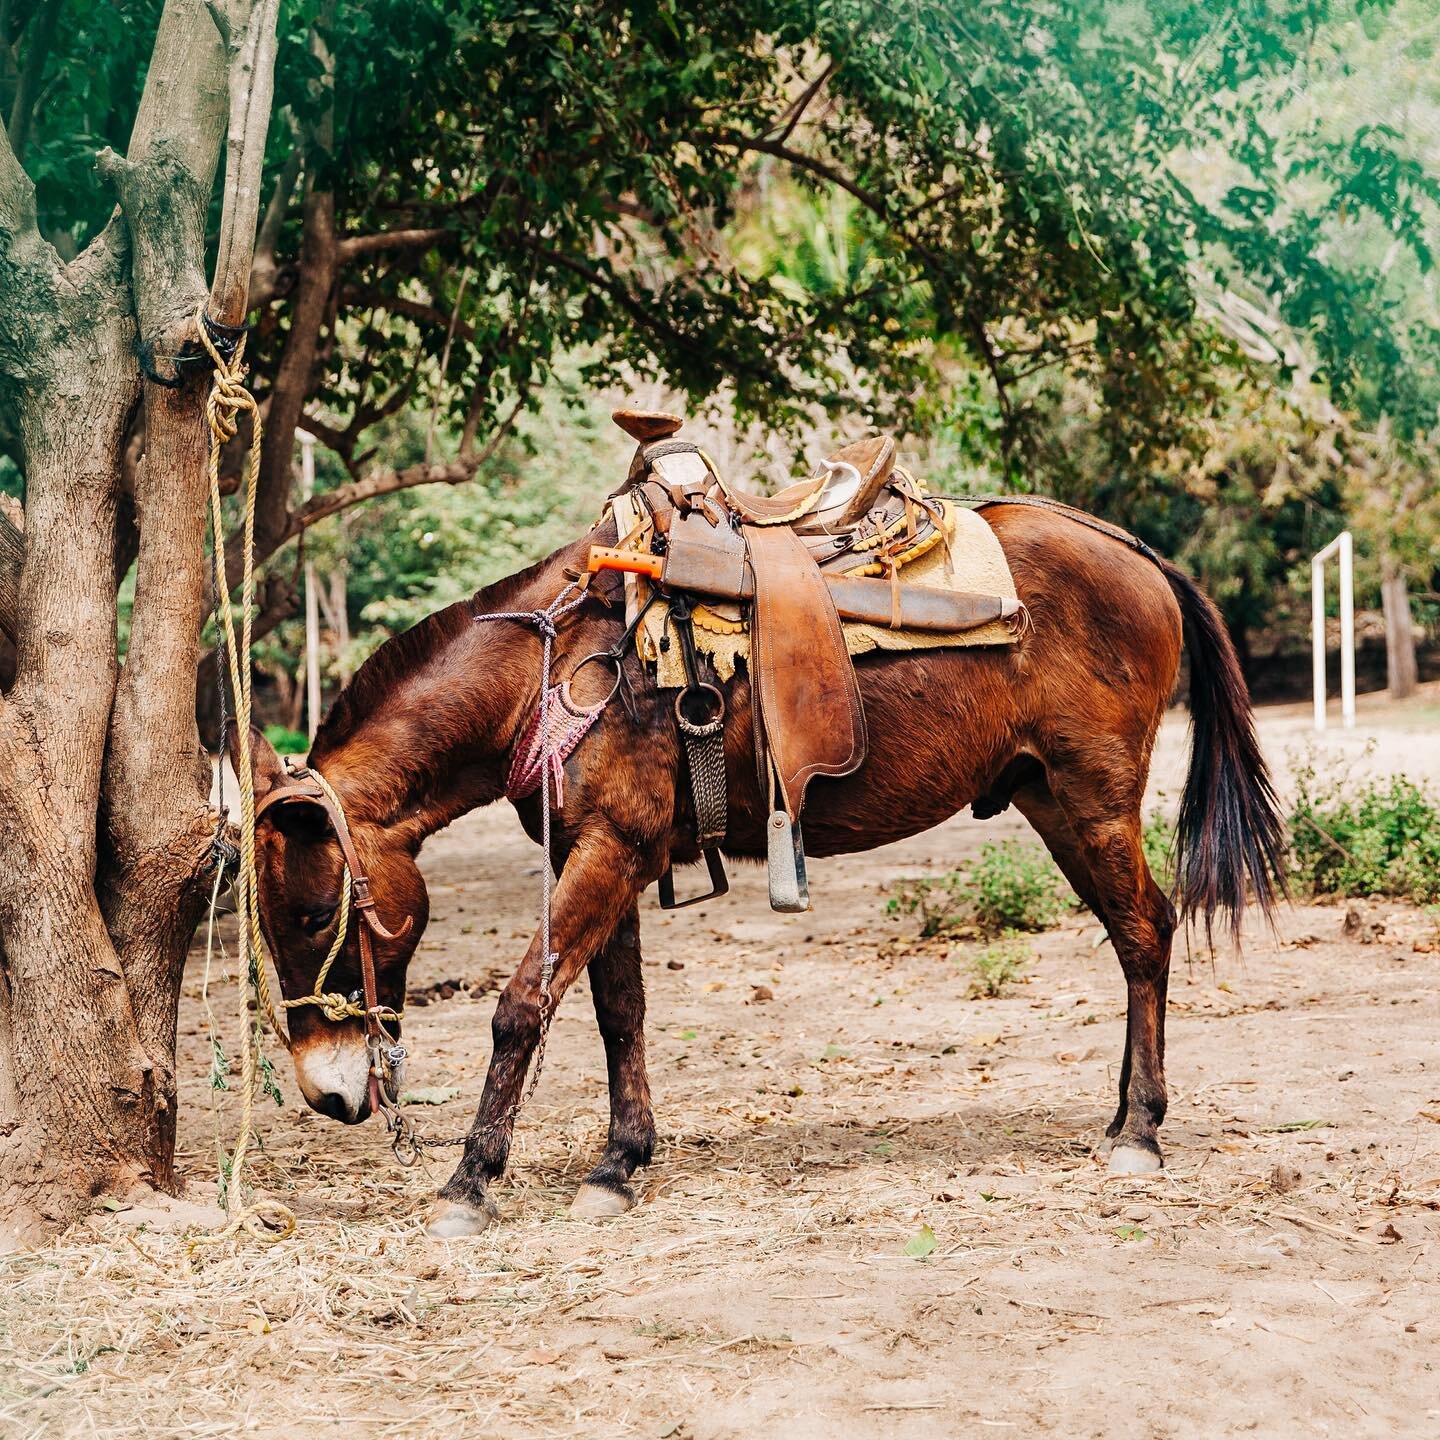 The Yelapa version of the work truck. He even comes on 4x4 hoof power. 
(Sorry about that- I can't holdback the Dad jokes) 
.
.
.
.
#sarahgalliphotography #yelapaweddingphotographer #yelapaportraitphotographer  #workhorse #lovedanimals #mechete #jung